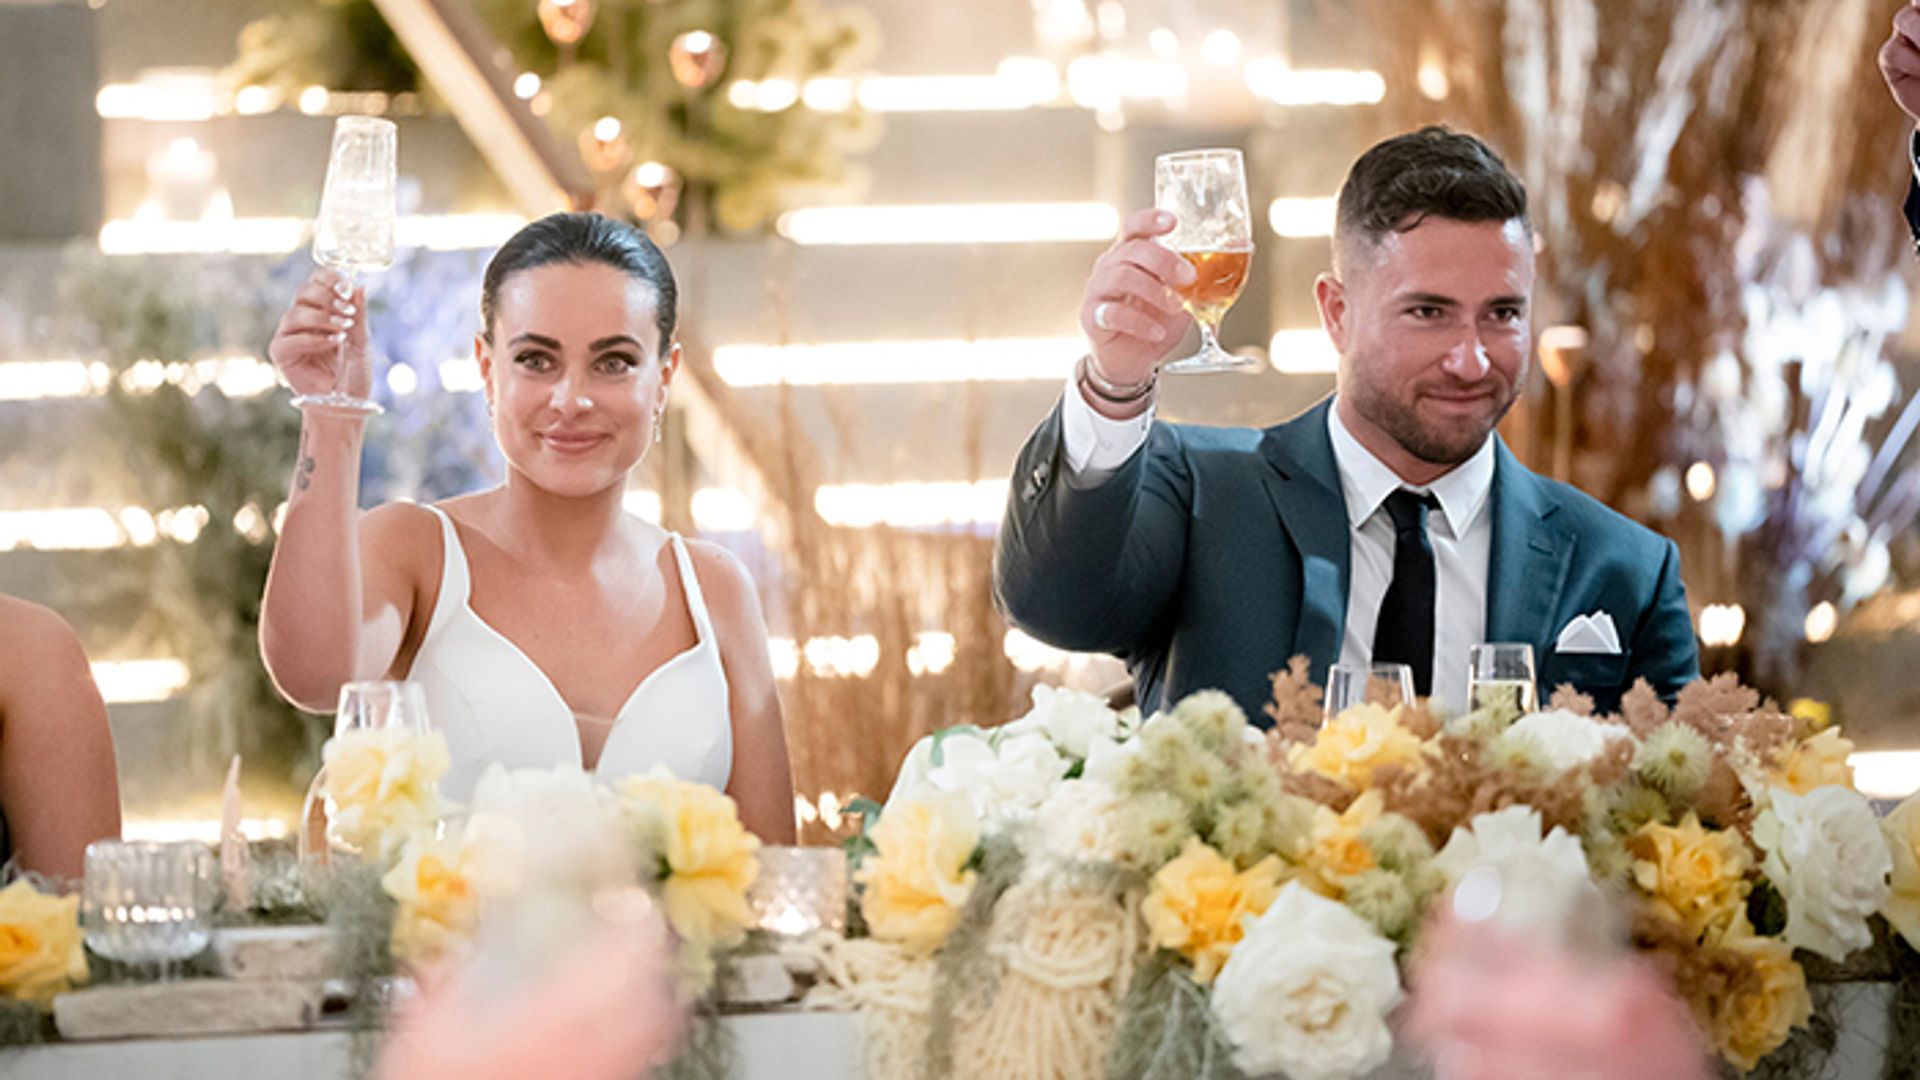 Bronte and Harrison hold up glasses in toast on wedding day